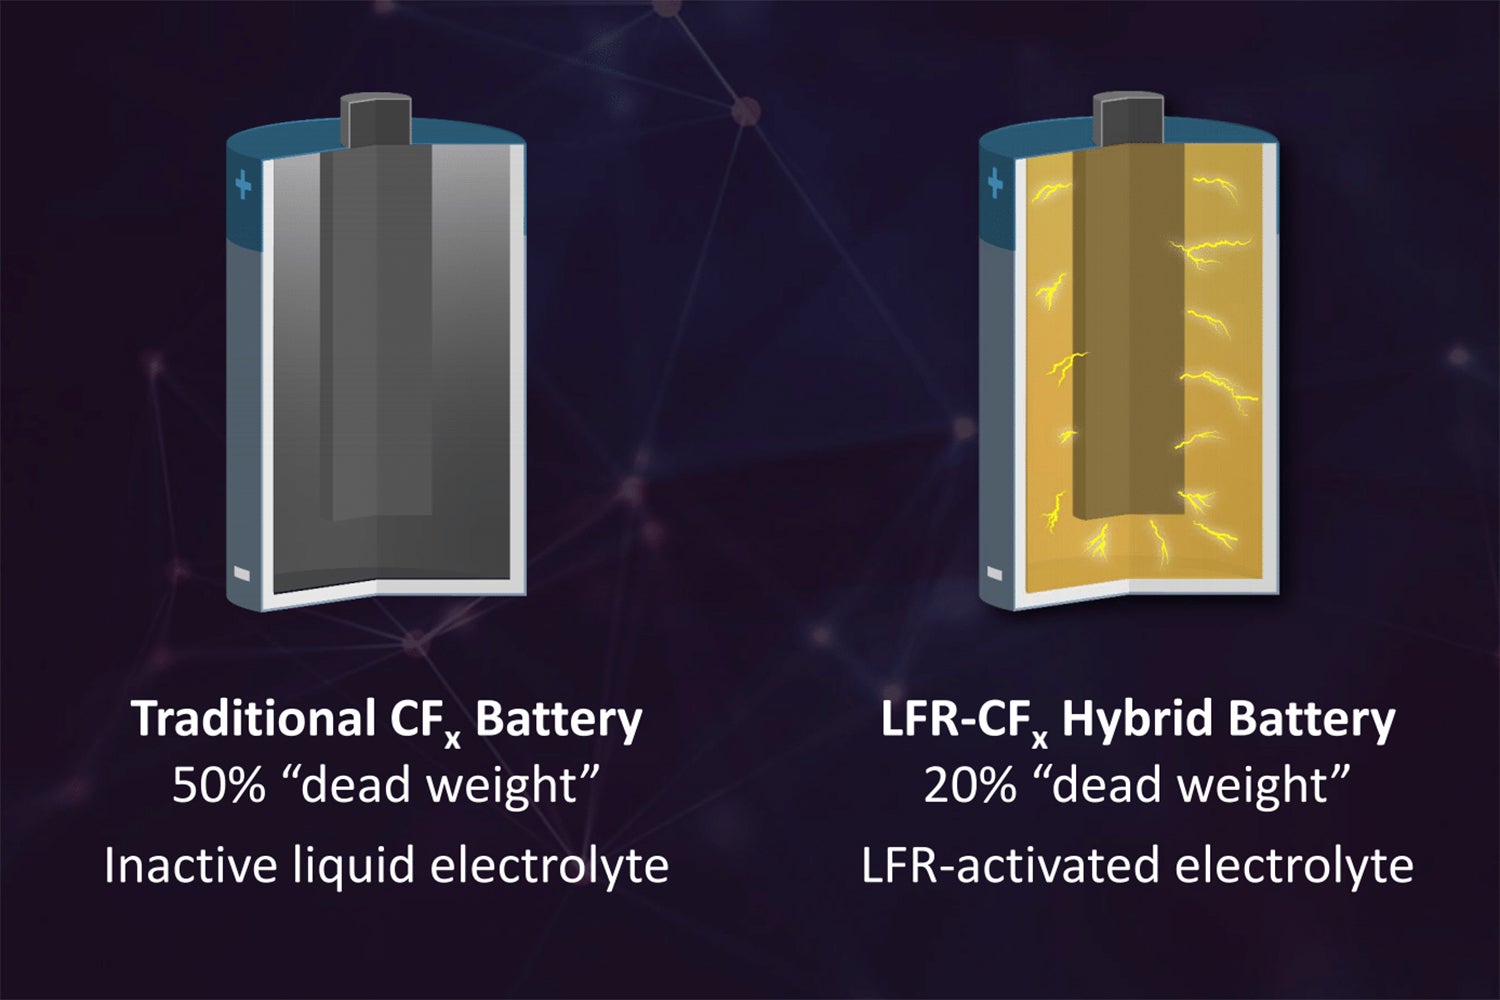 On the right, a traditional primary battery, and on the left, the new catholyte battery depicted in yellow